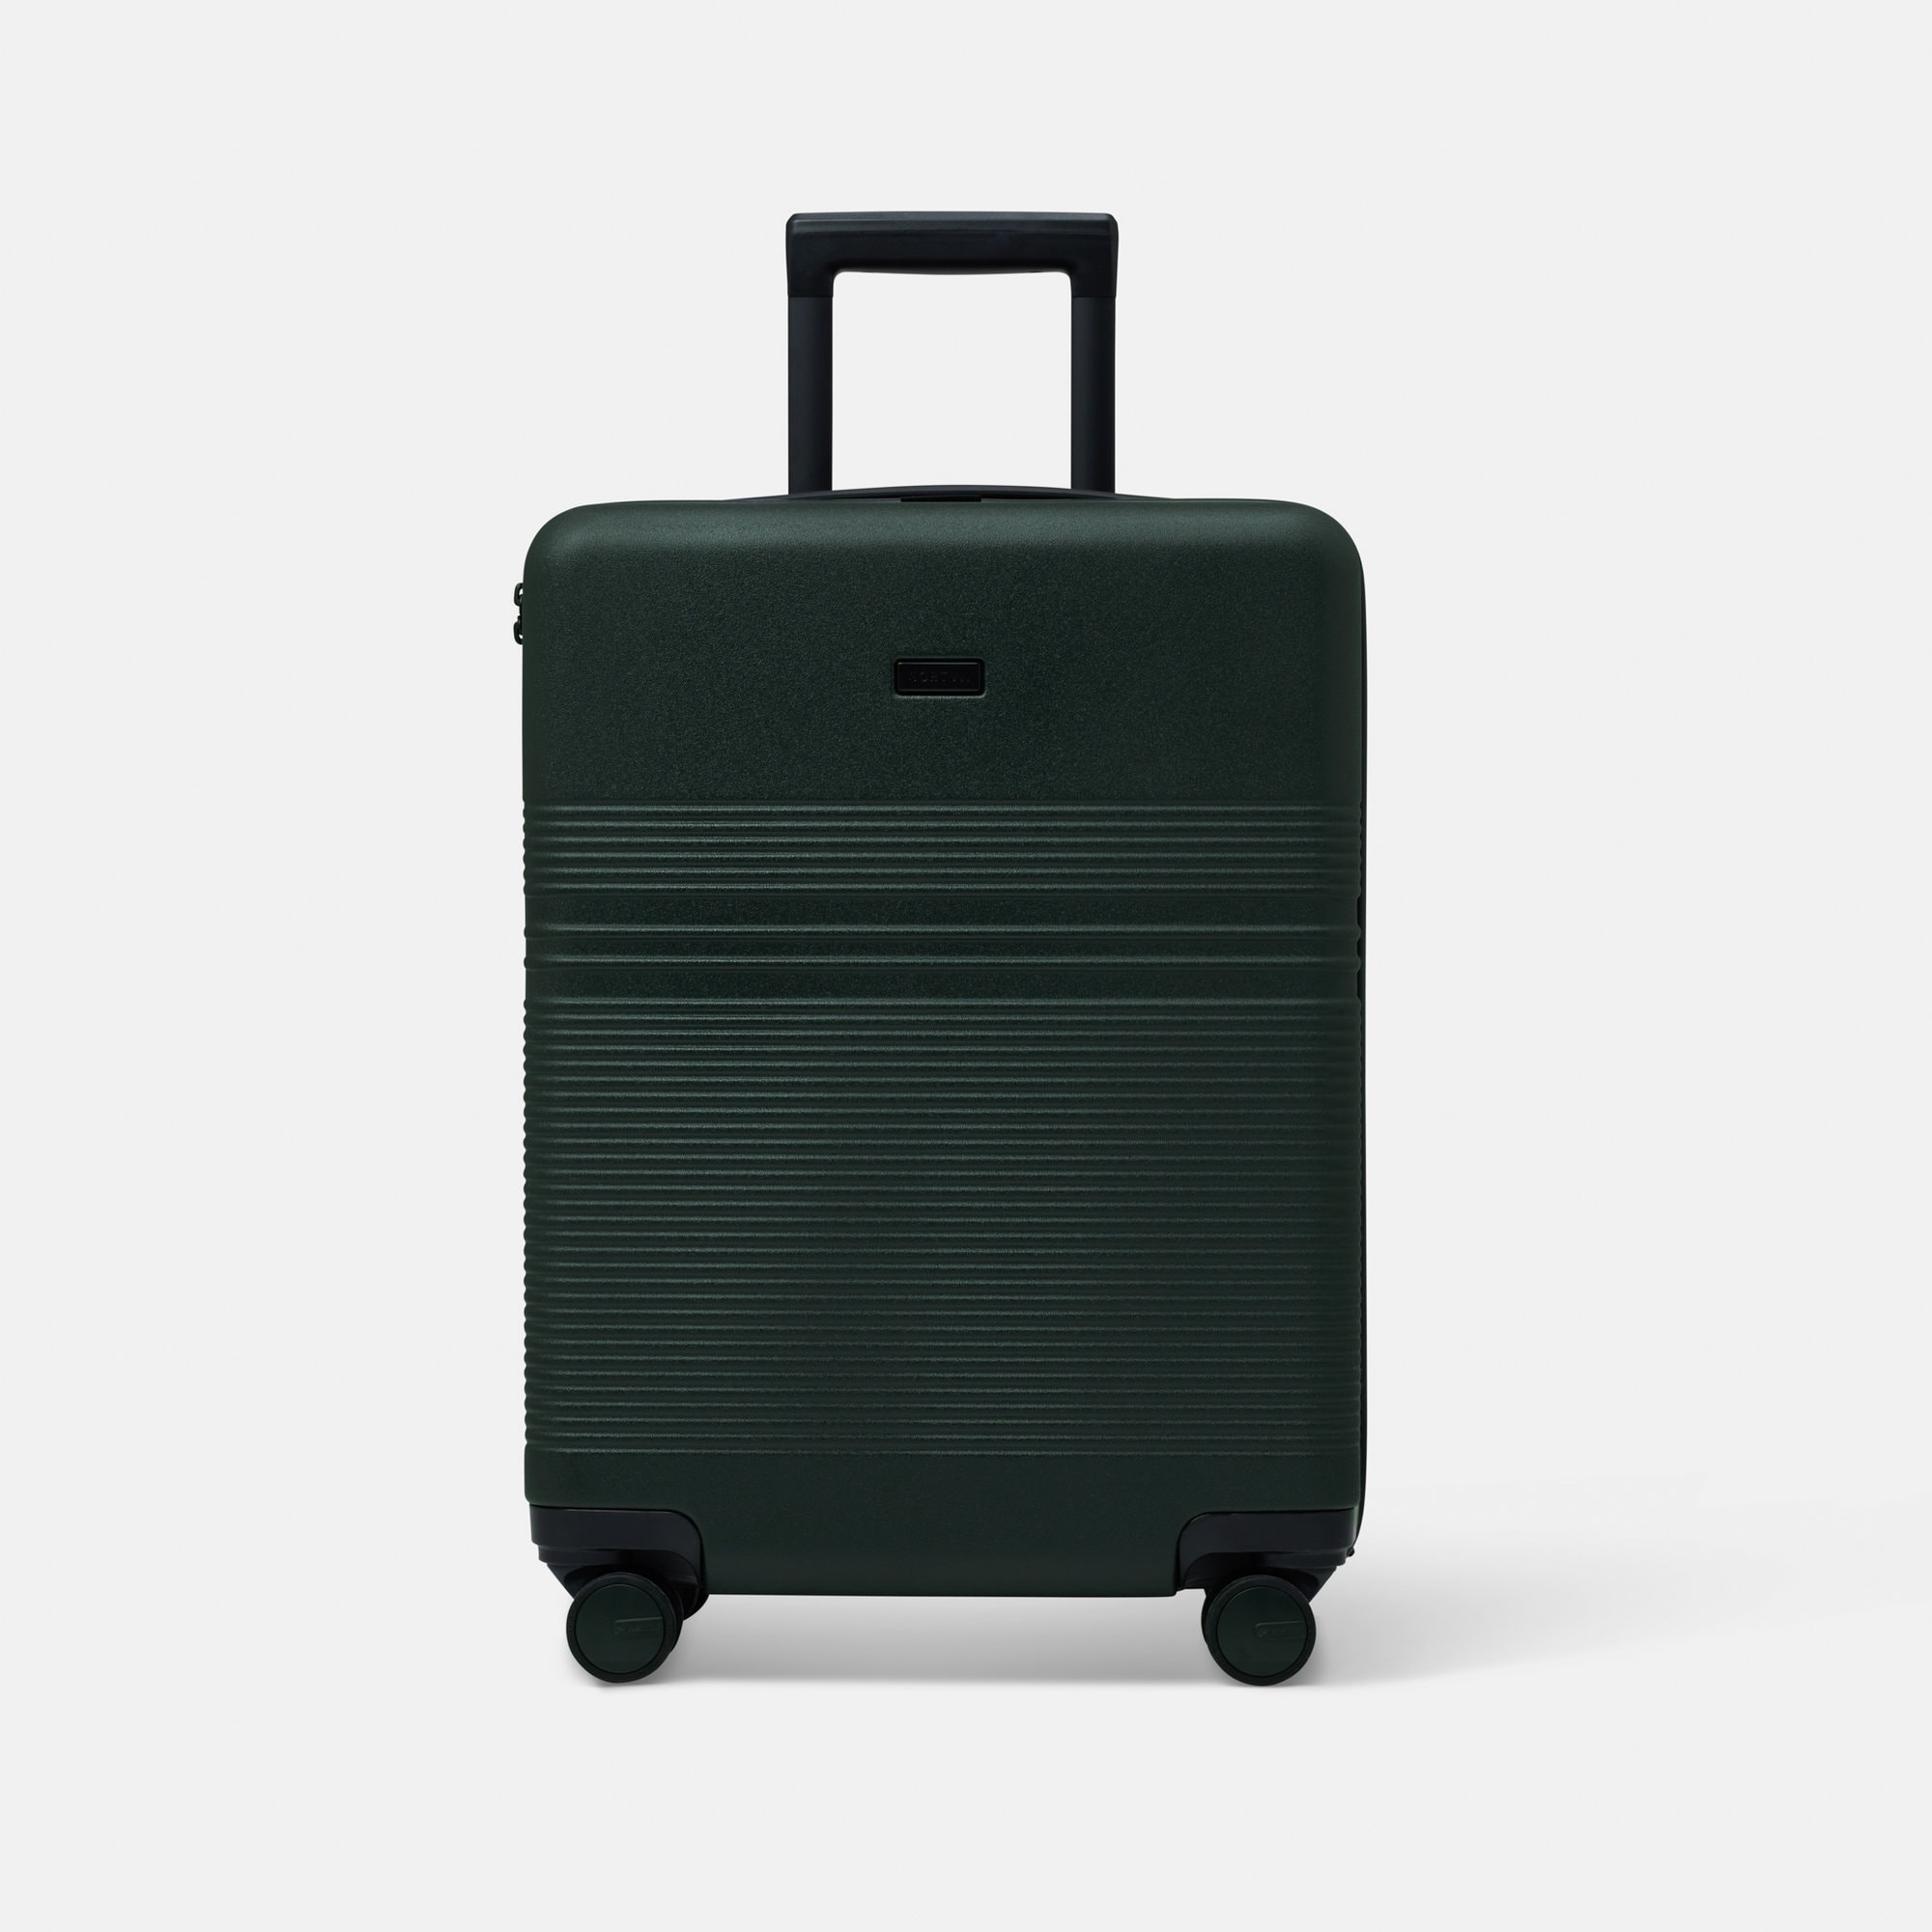 Essential Carry-On Suitcase | NORTVI | Green | Sustainable and Unique